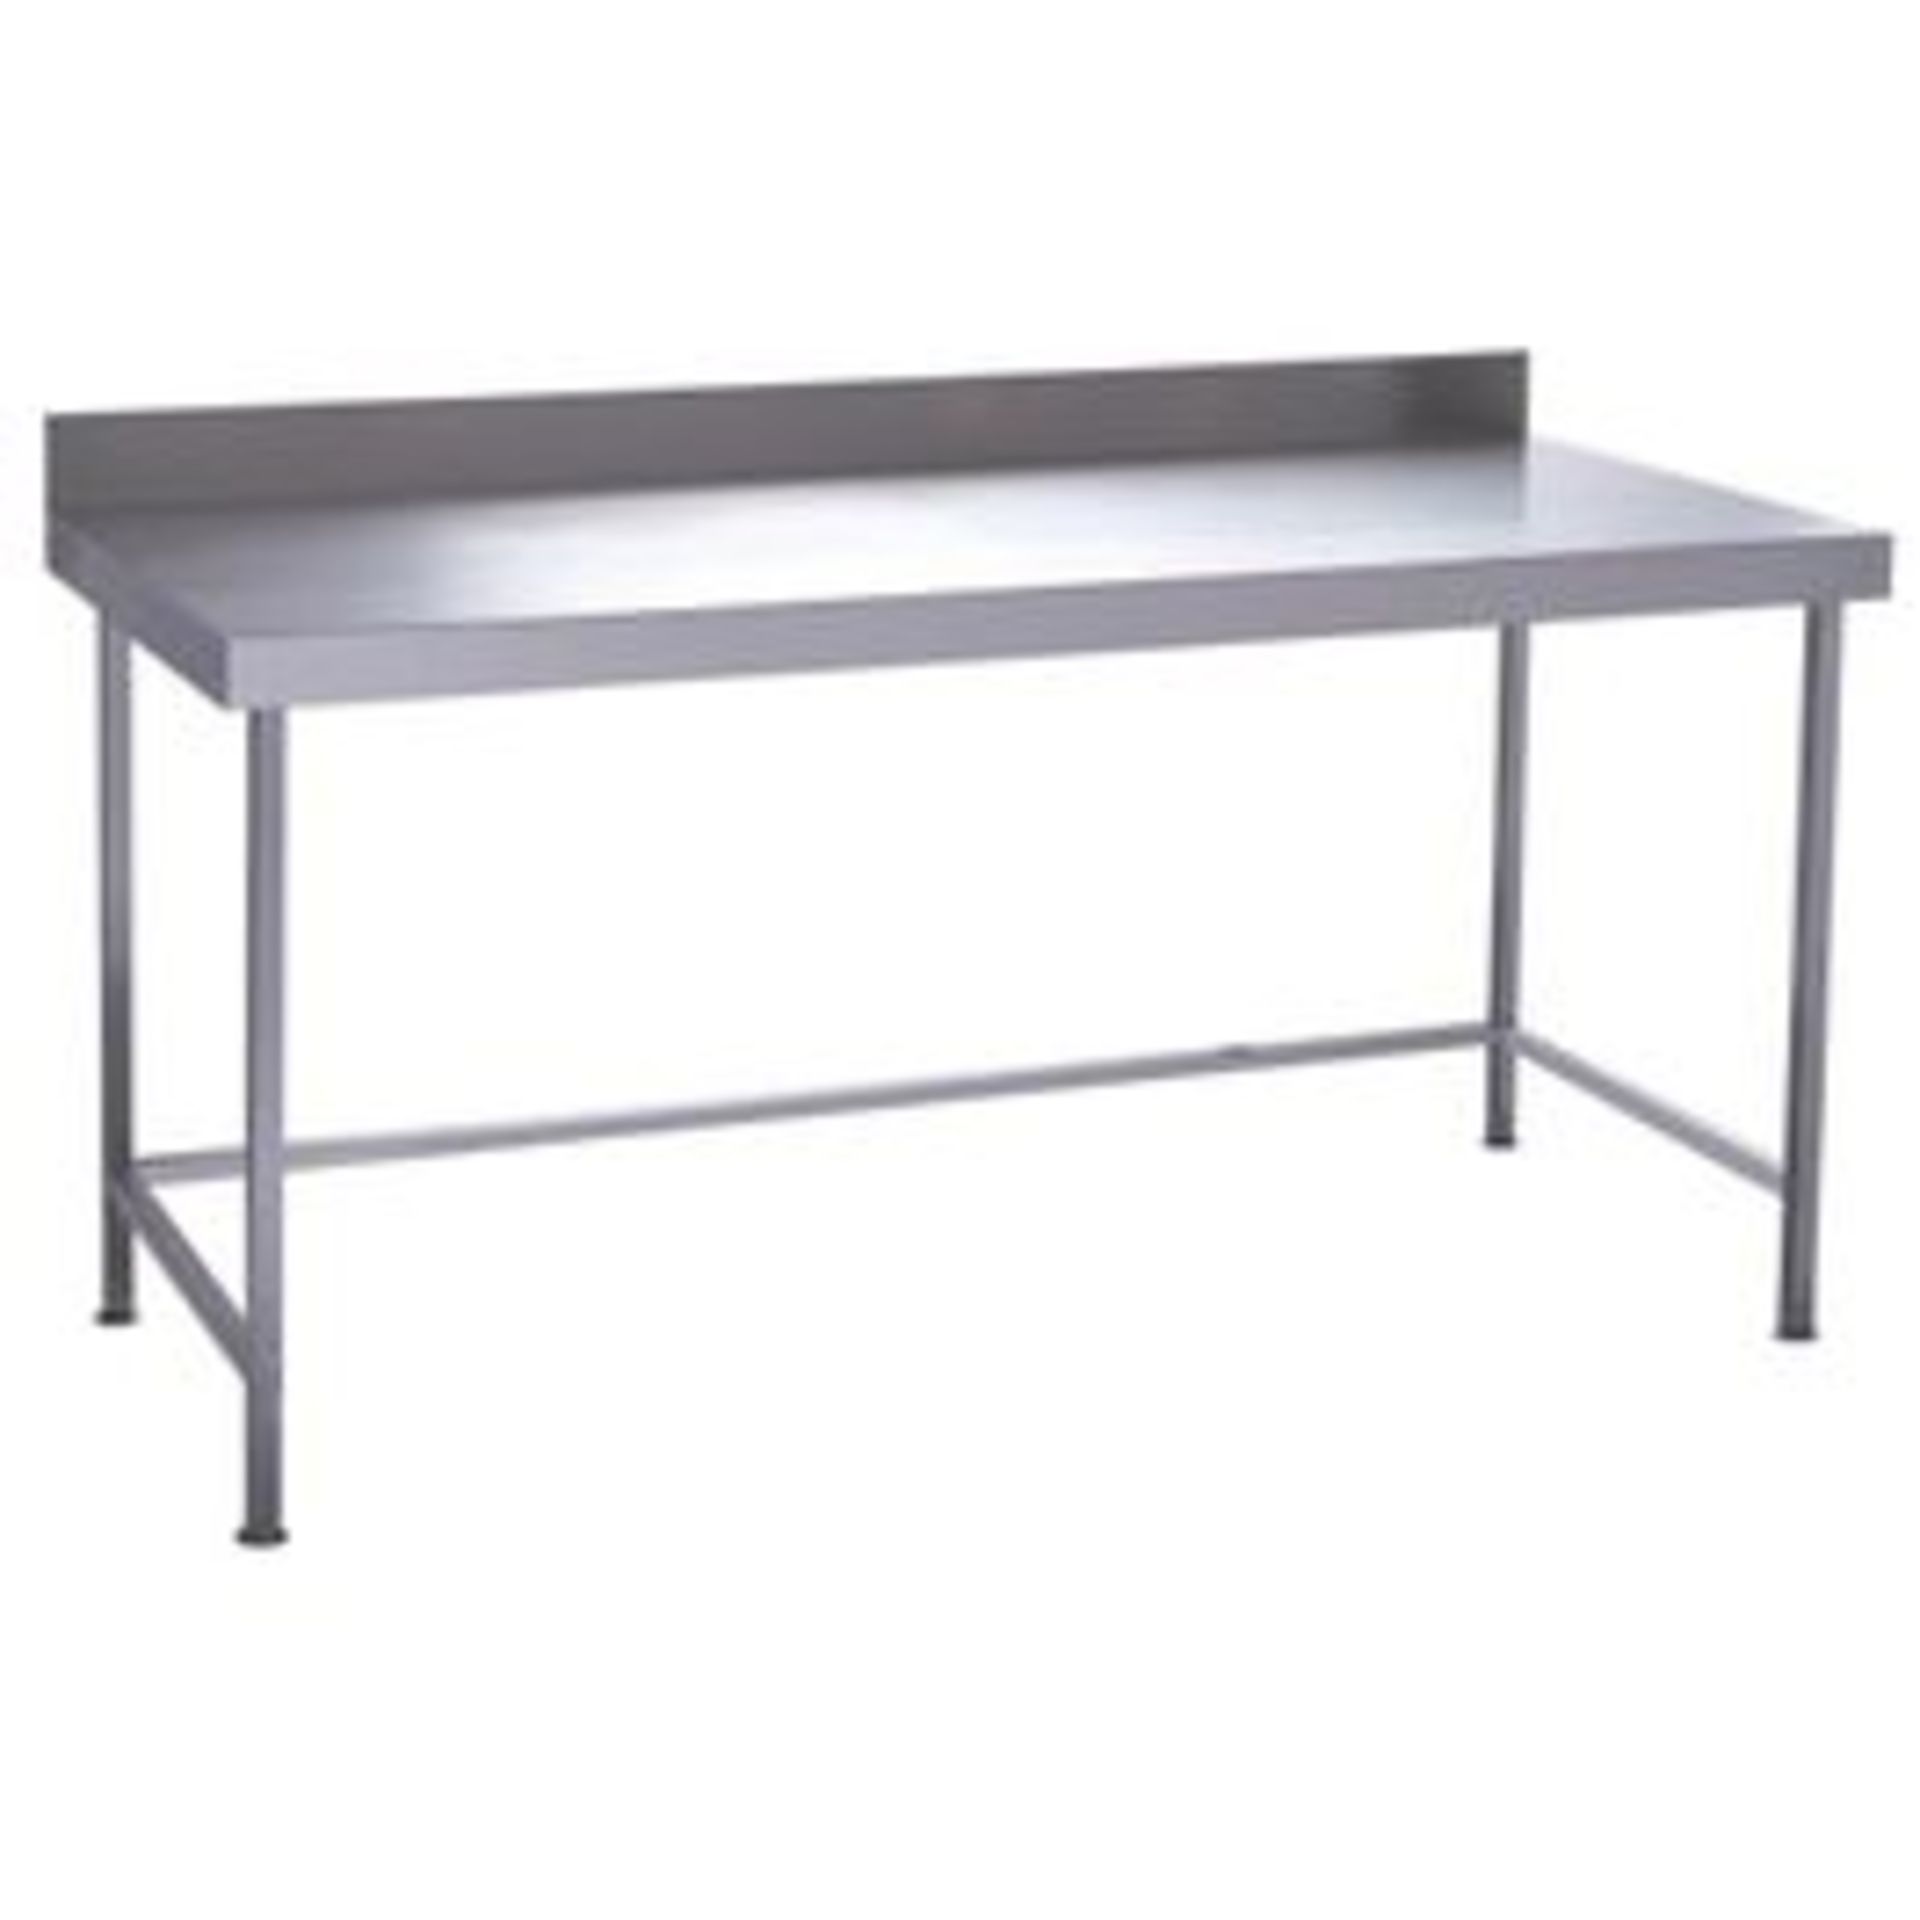 1700mm Stainless Steel Catering Table With Rear Upstand